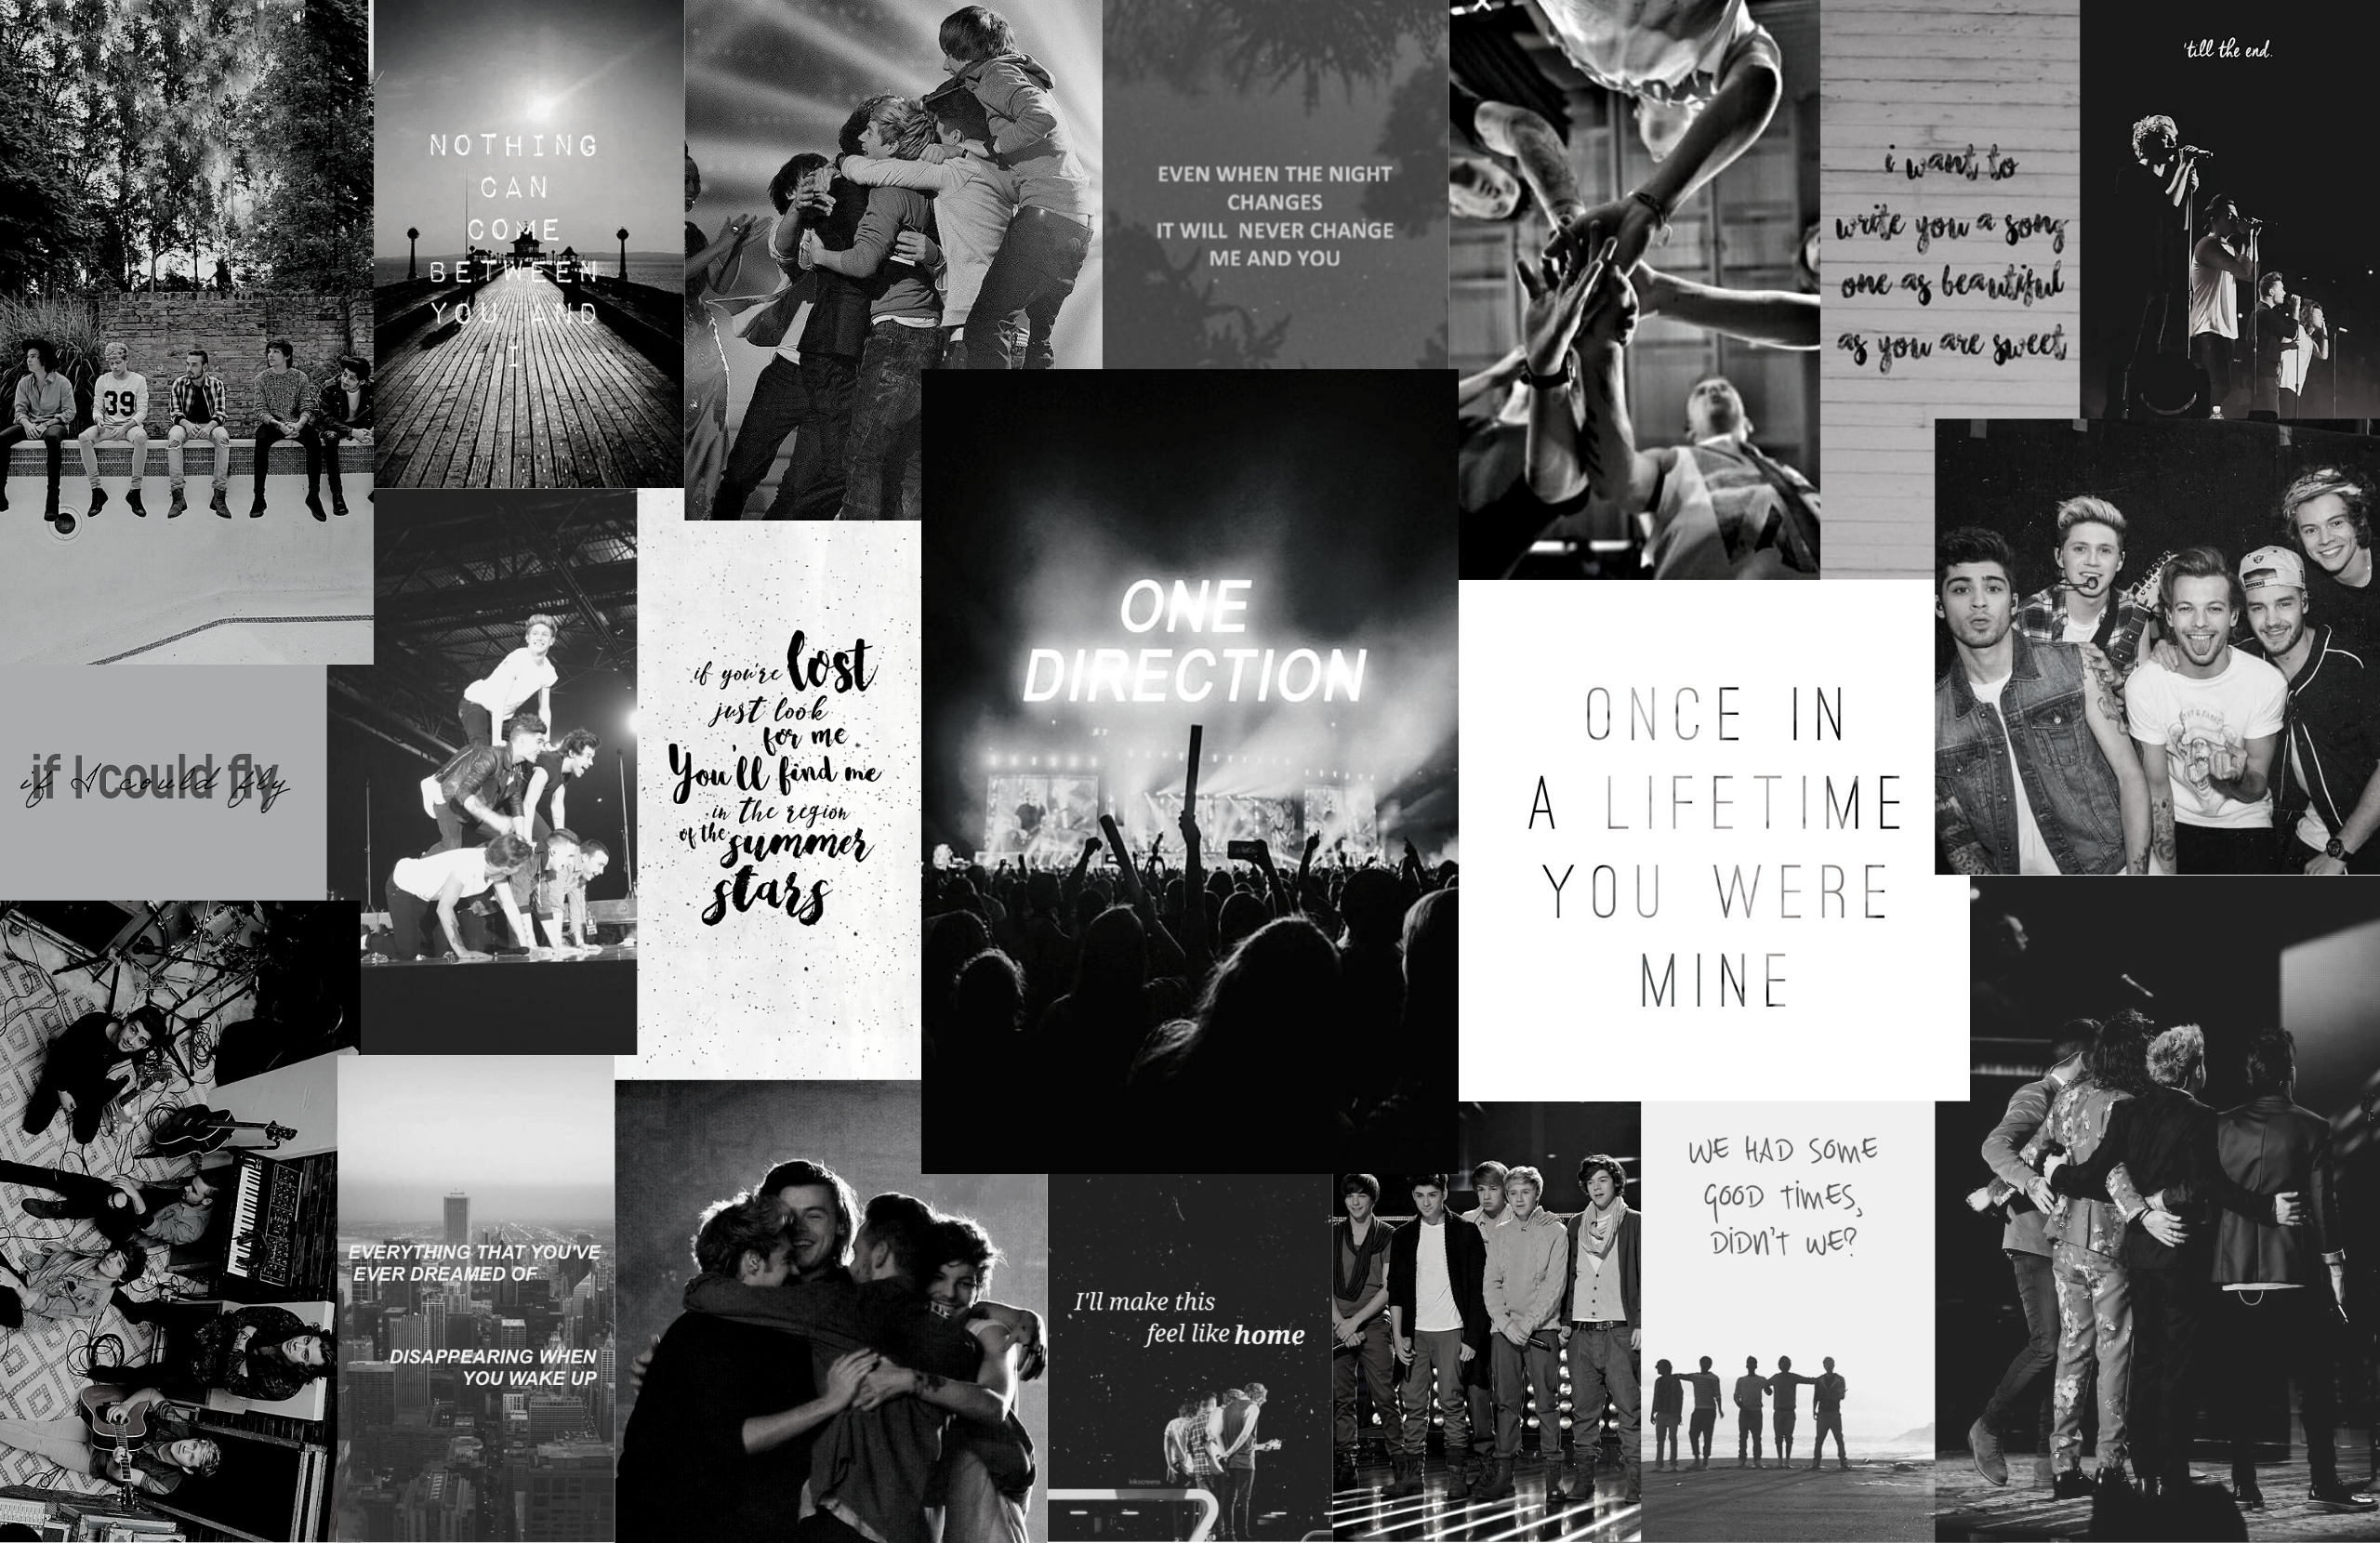 One Direction Aesthetic Computer Wallpaper Colored and B&W. Etsy. One direction wallpaper, One direction collage, One direction background